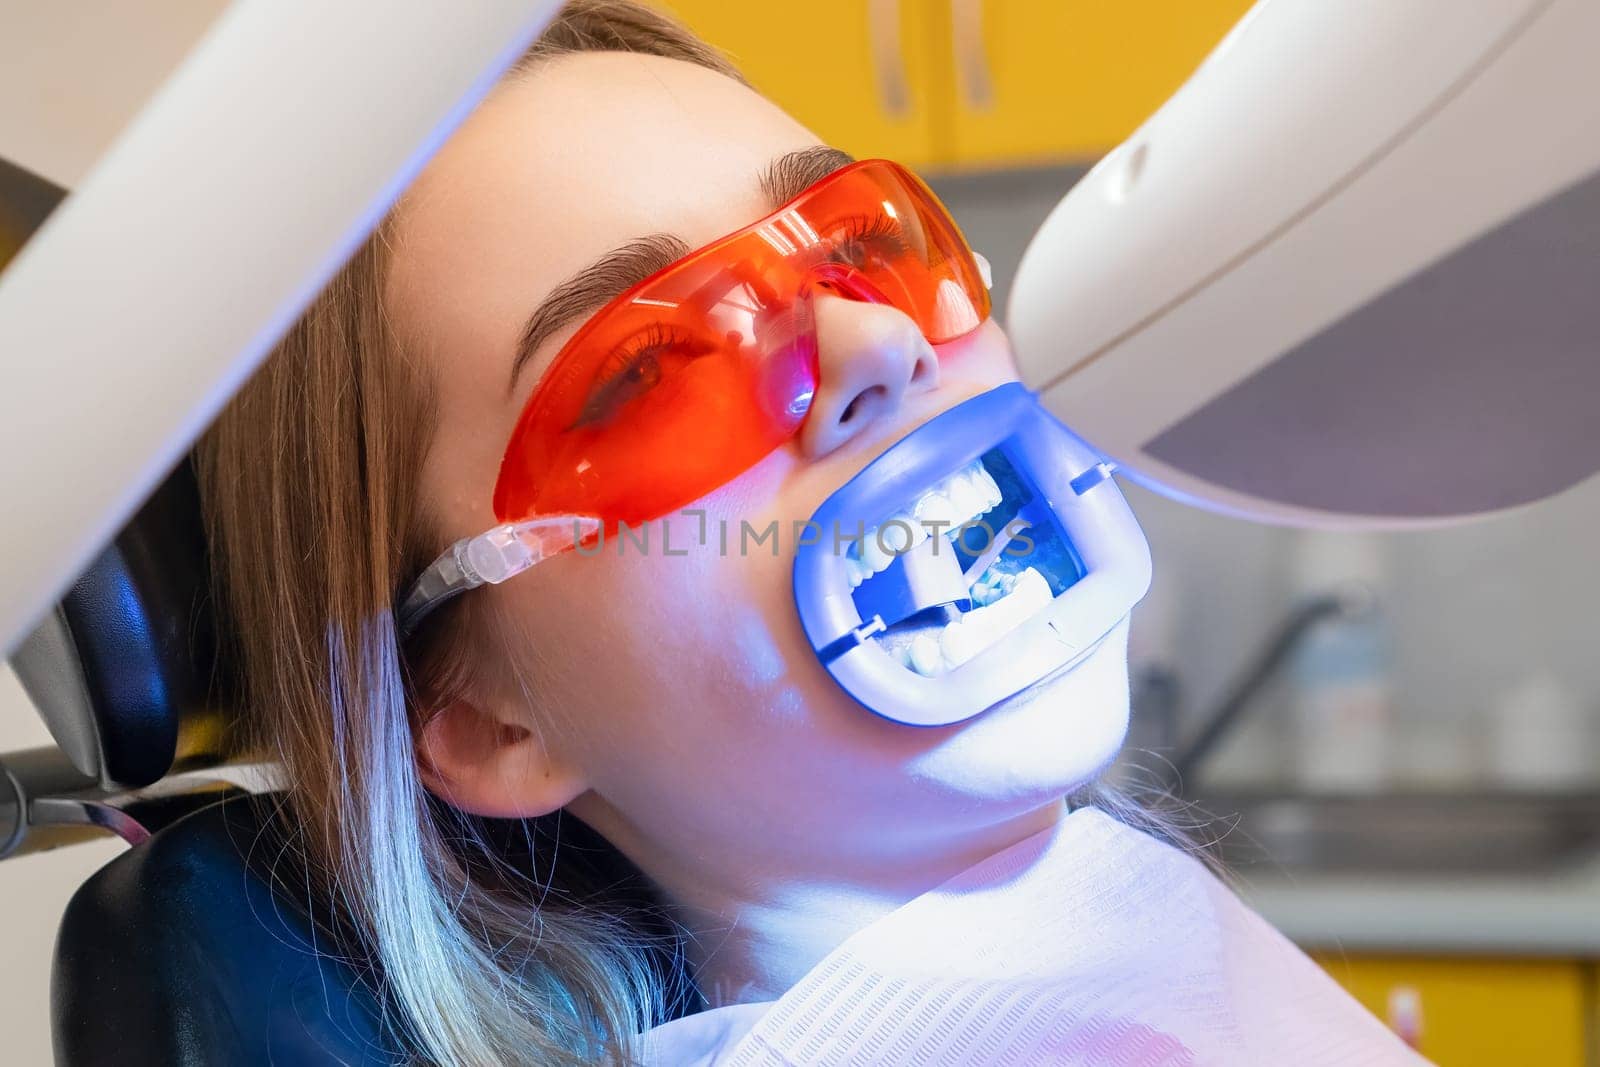 UV lamp shines on the patiens teeth during teeth whitening at dentist clinic by vladimka